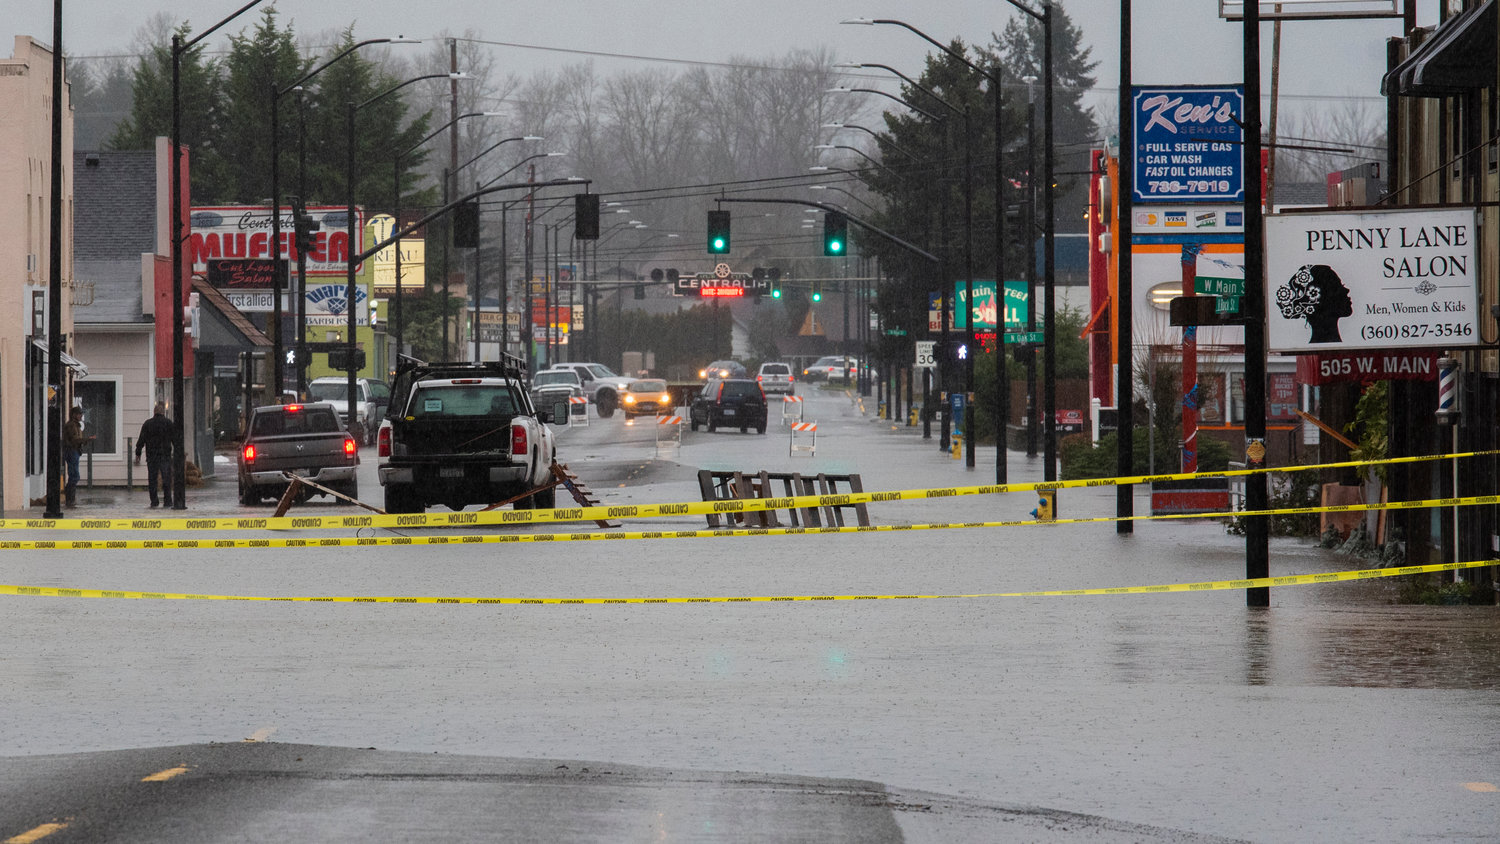 West Main Street in Centralia is taped off with caution tape as floodwaters stretch across the roadway on Thursday.